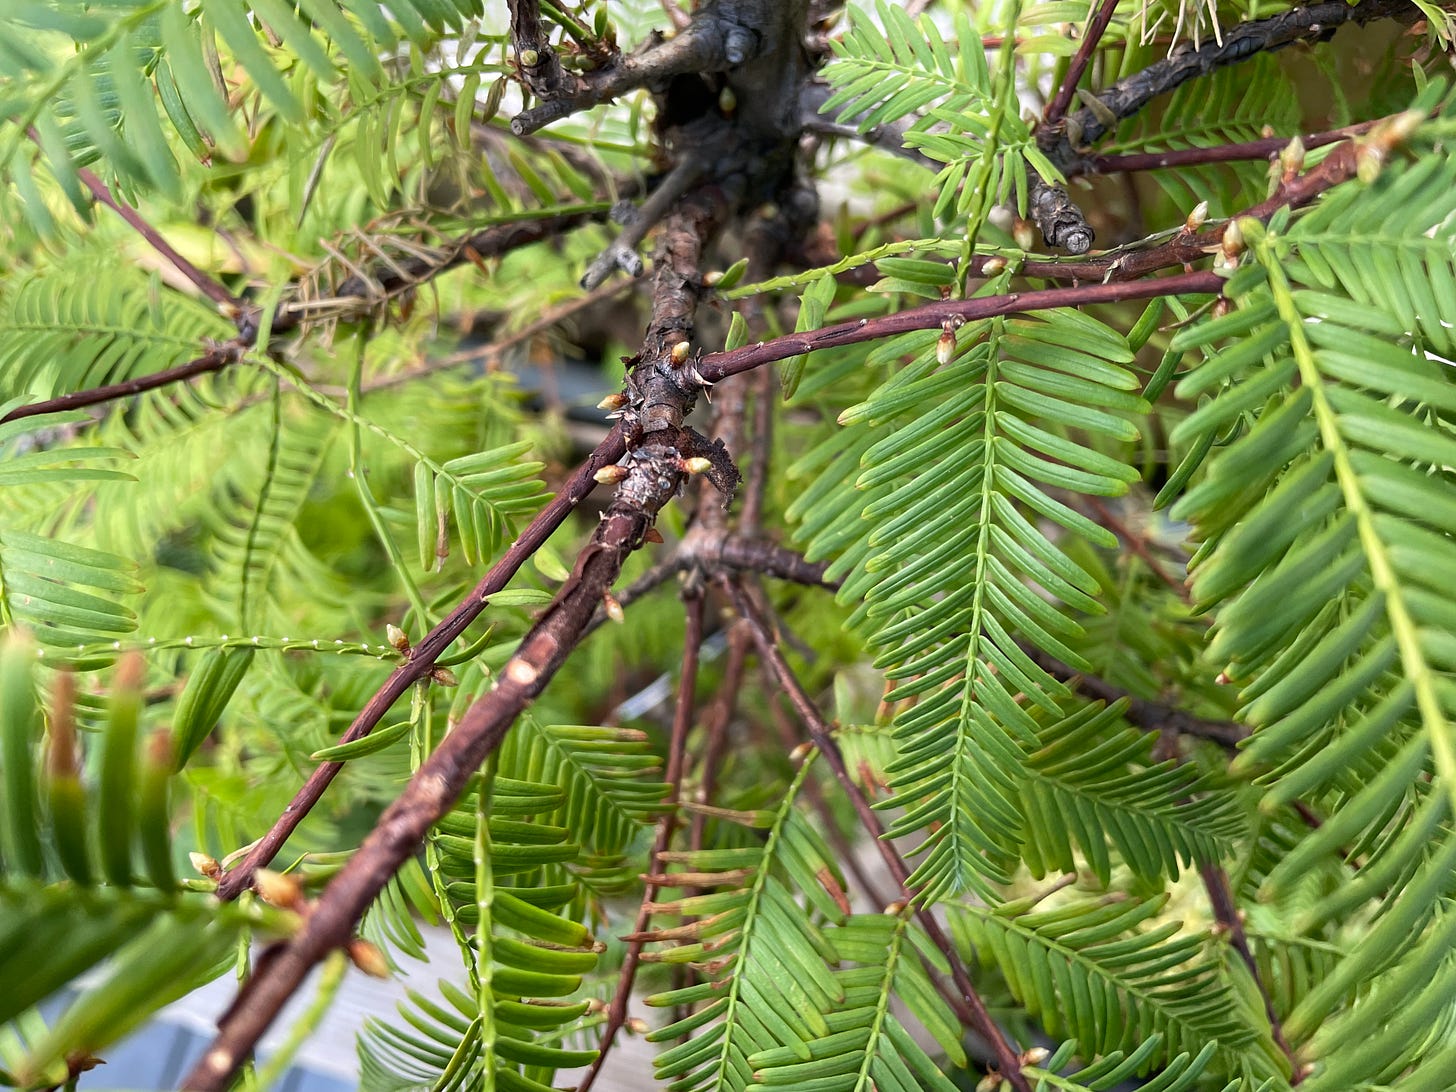 ID: Close up photo of dawn redwood branch showing buds poking out every which way